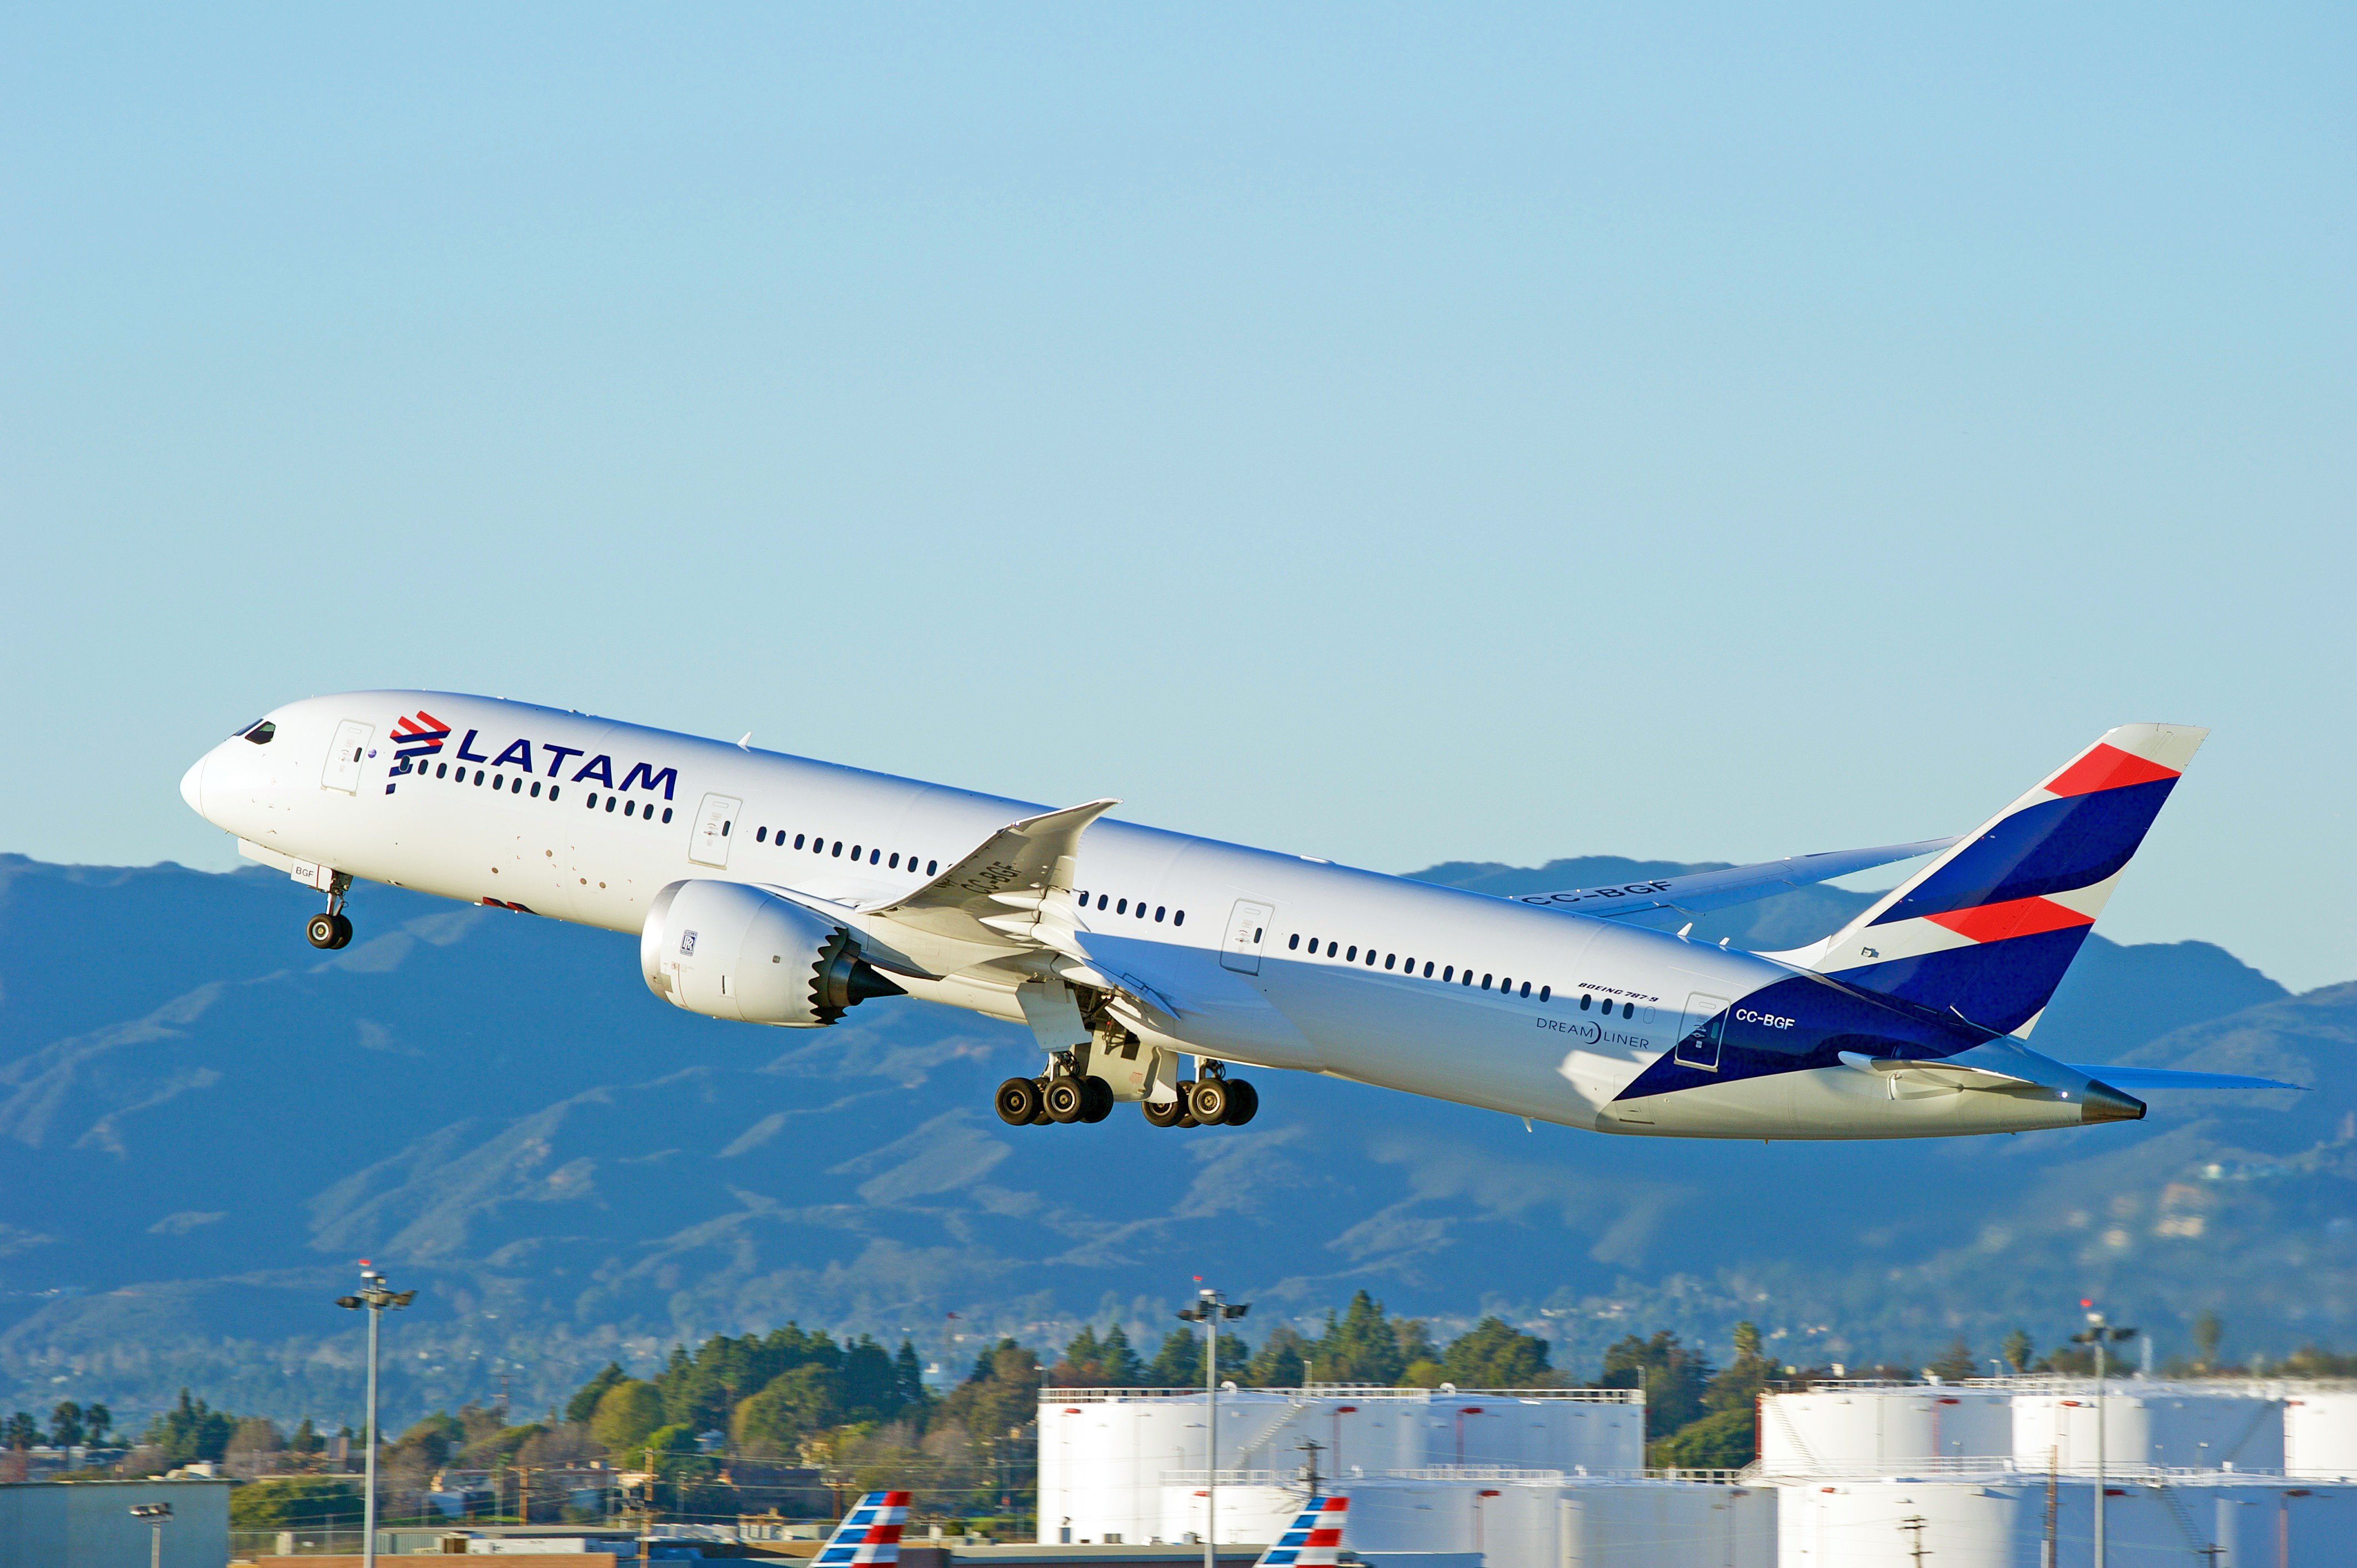 A LATAM Boeing 787 taking off